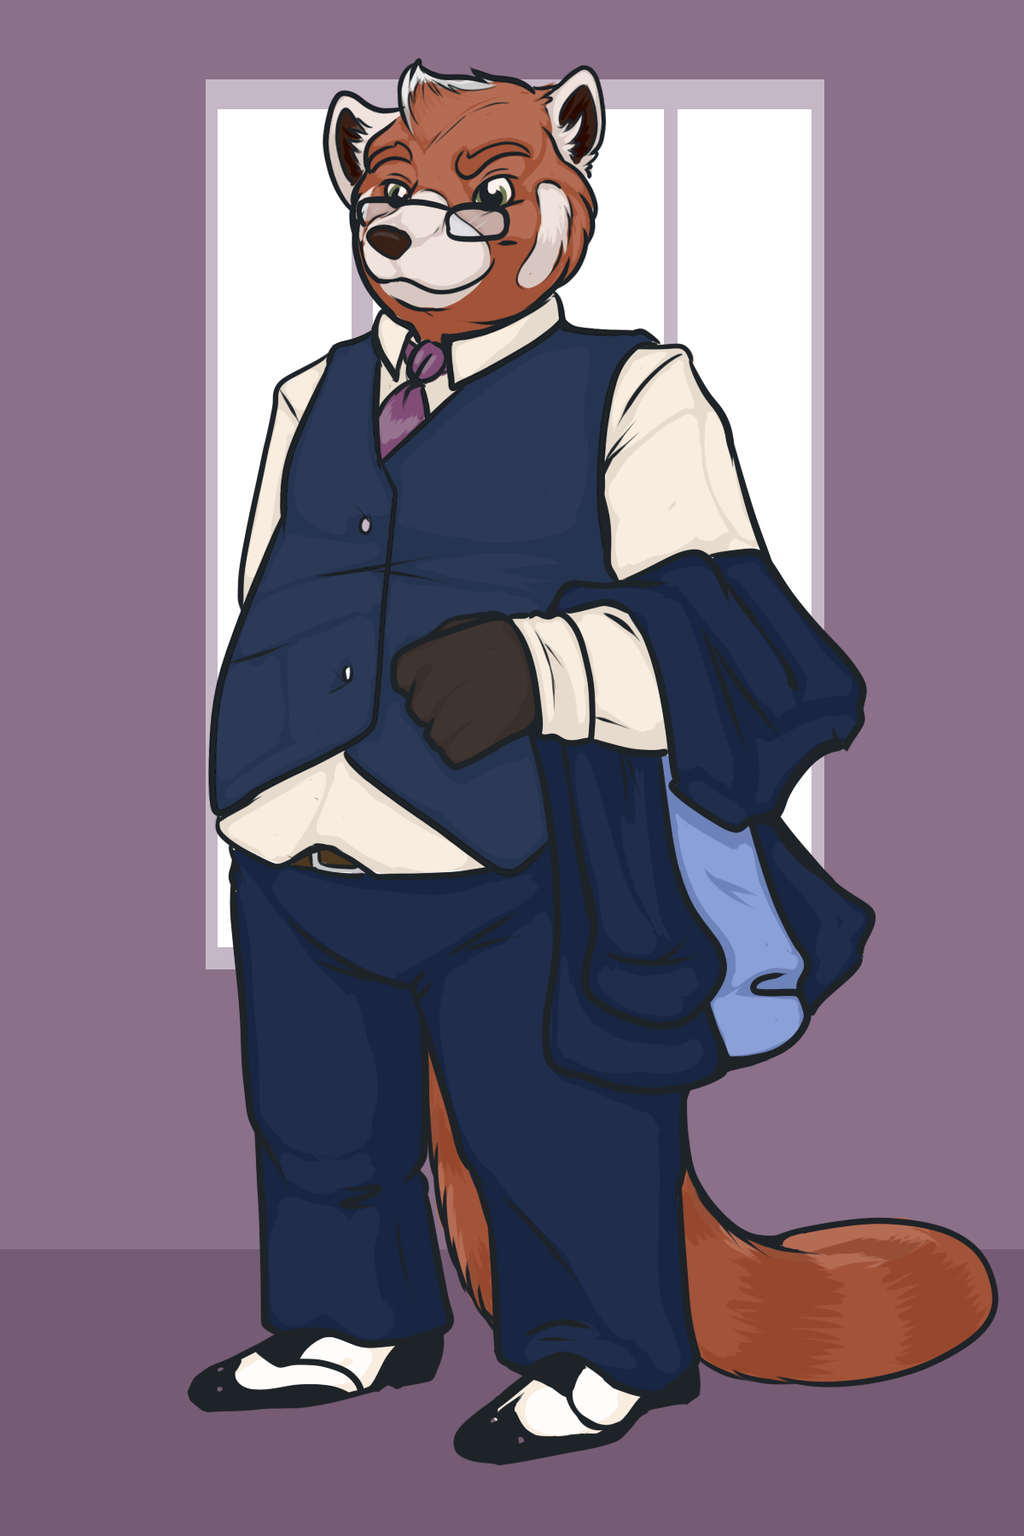 Sheebs, Suited up.